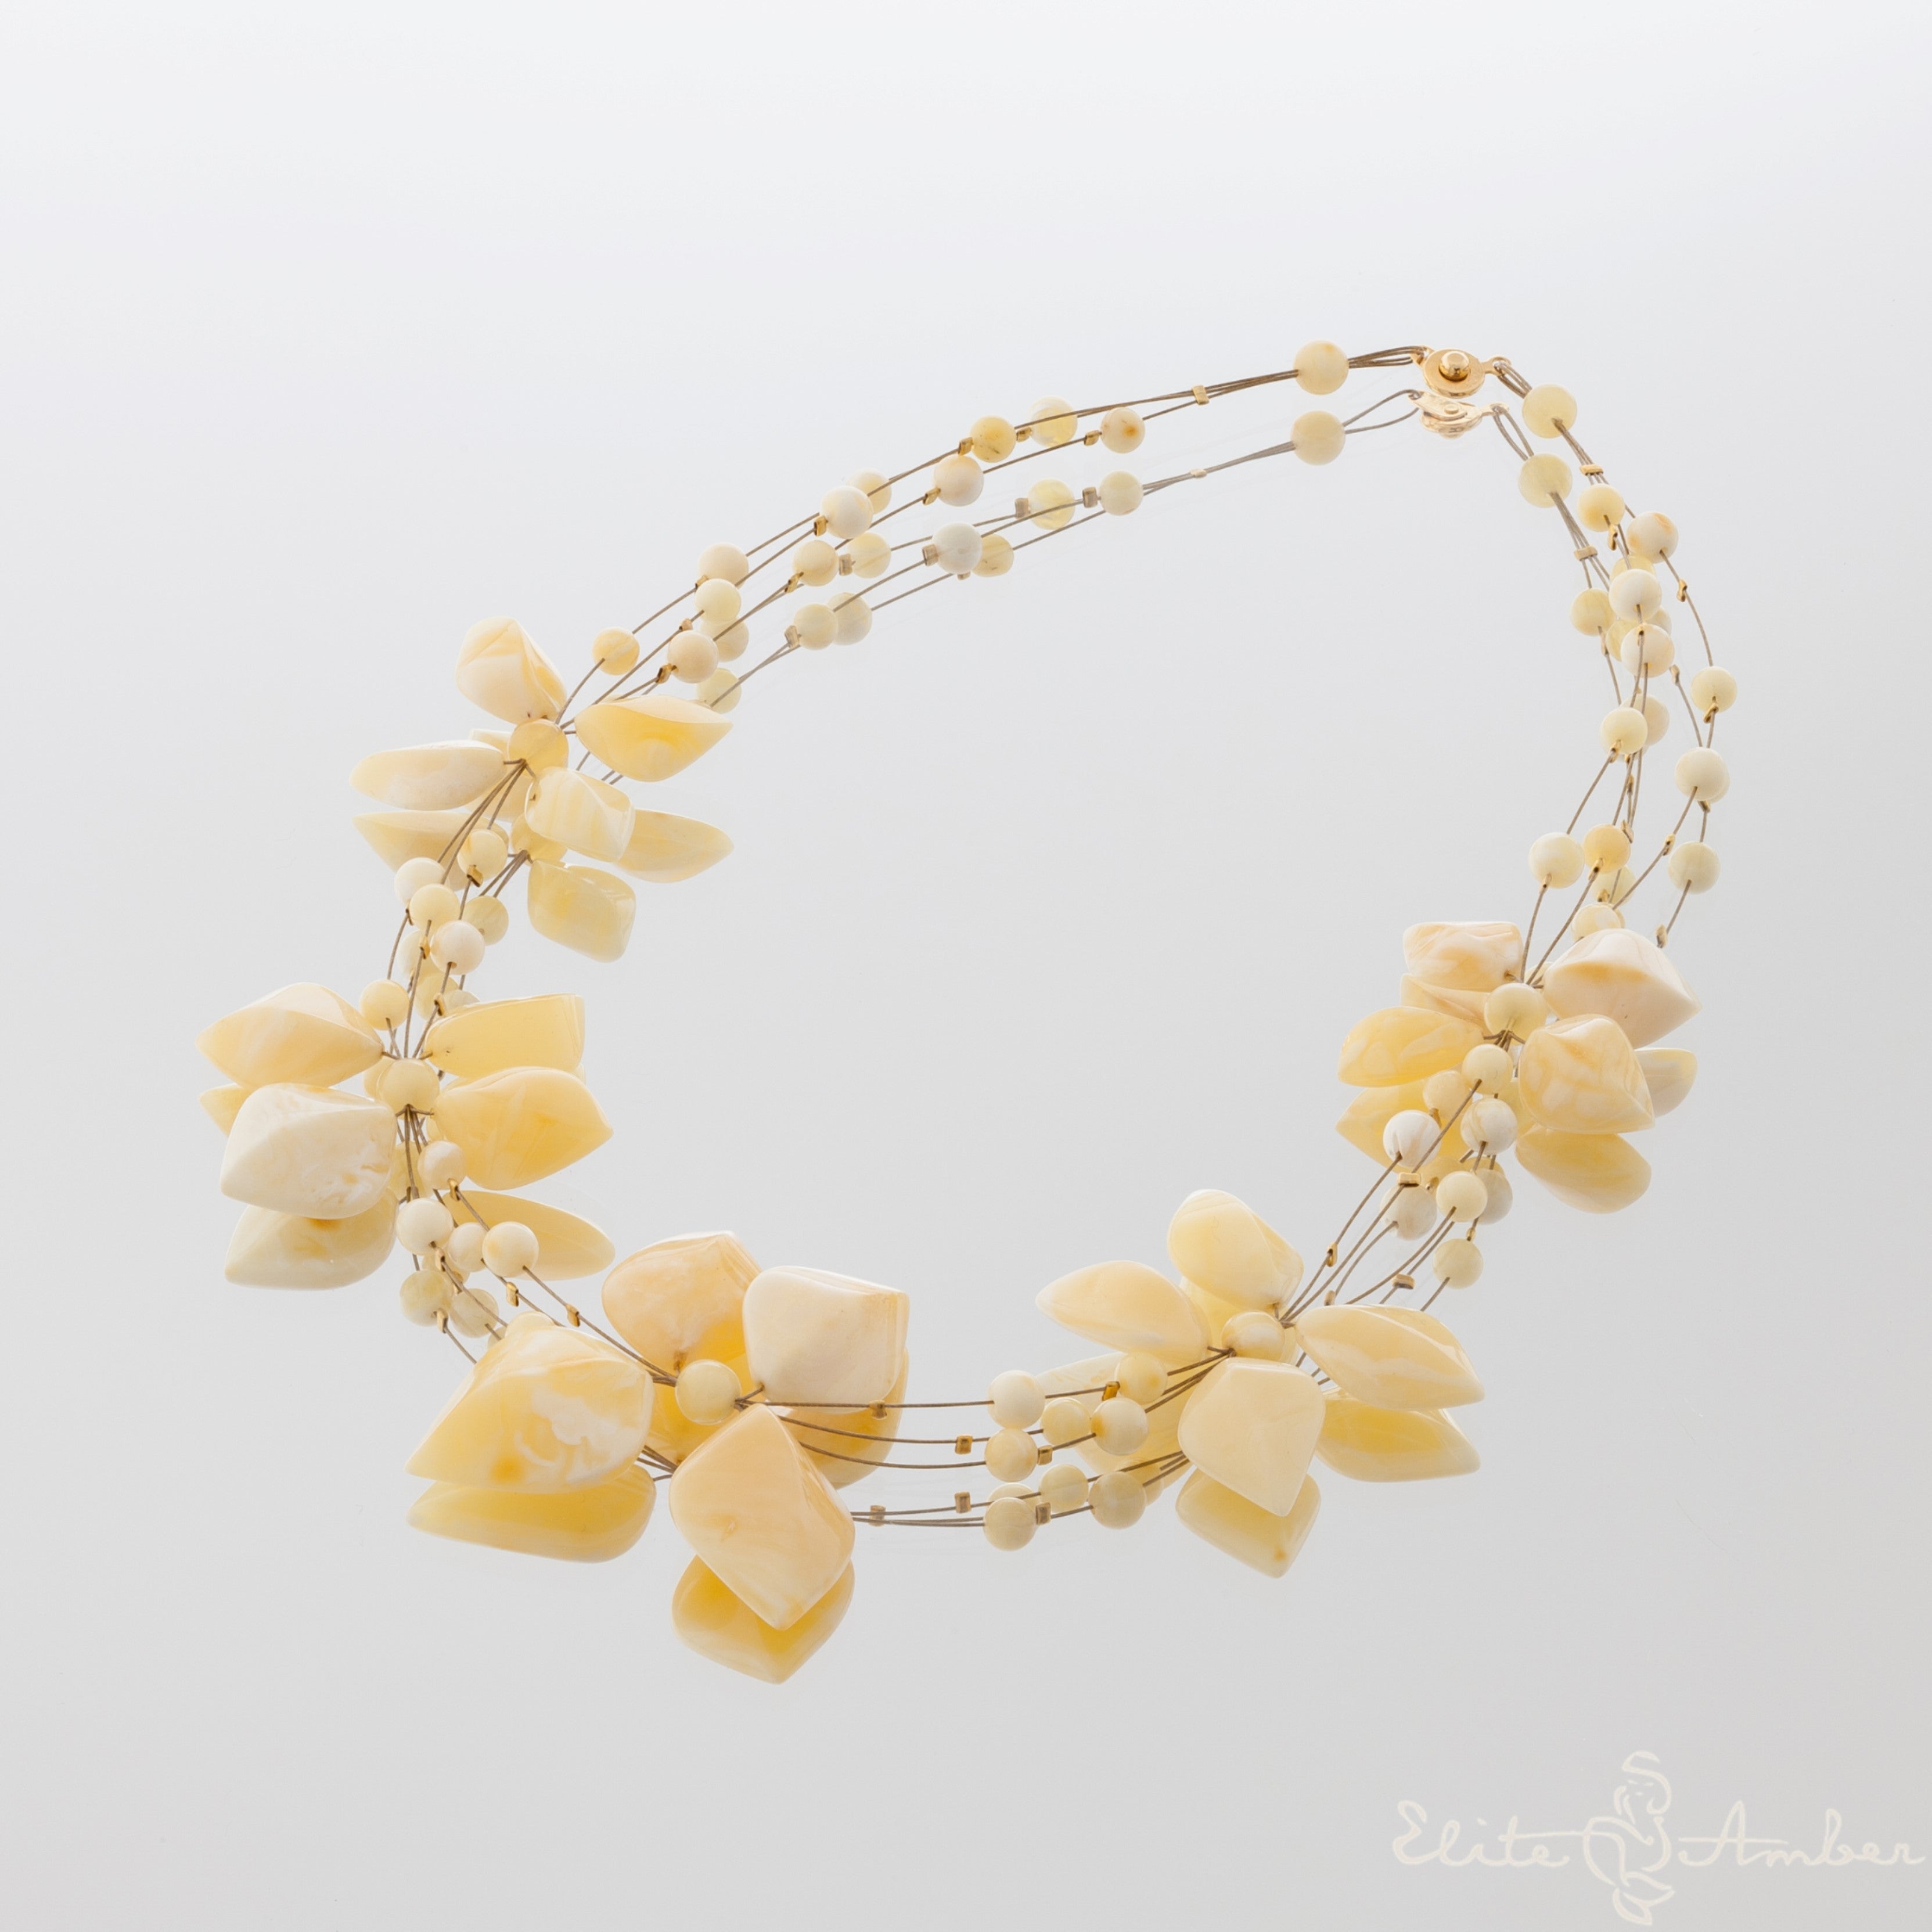 Amber necklace "Brilliant royal flowers"